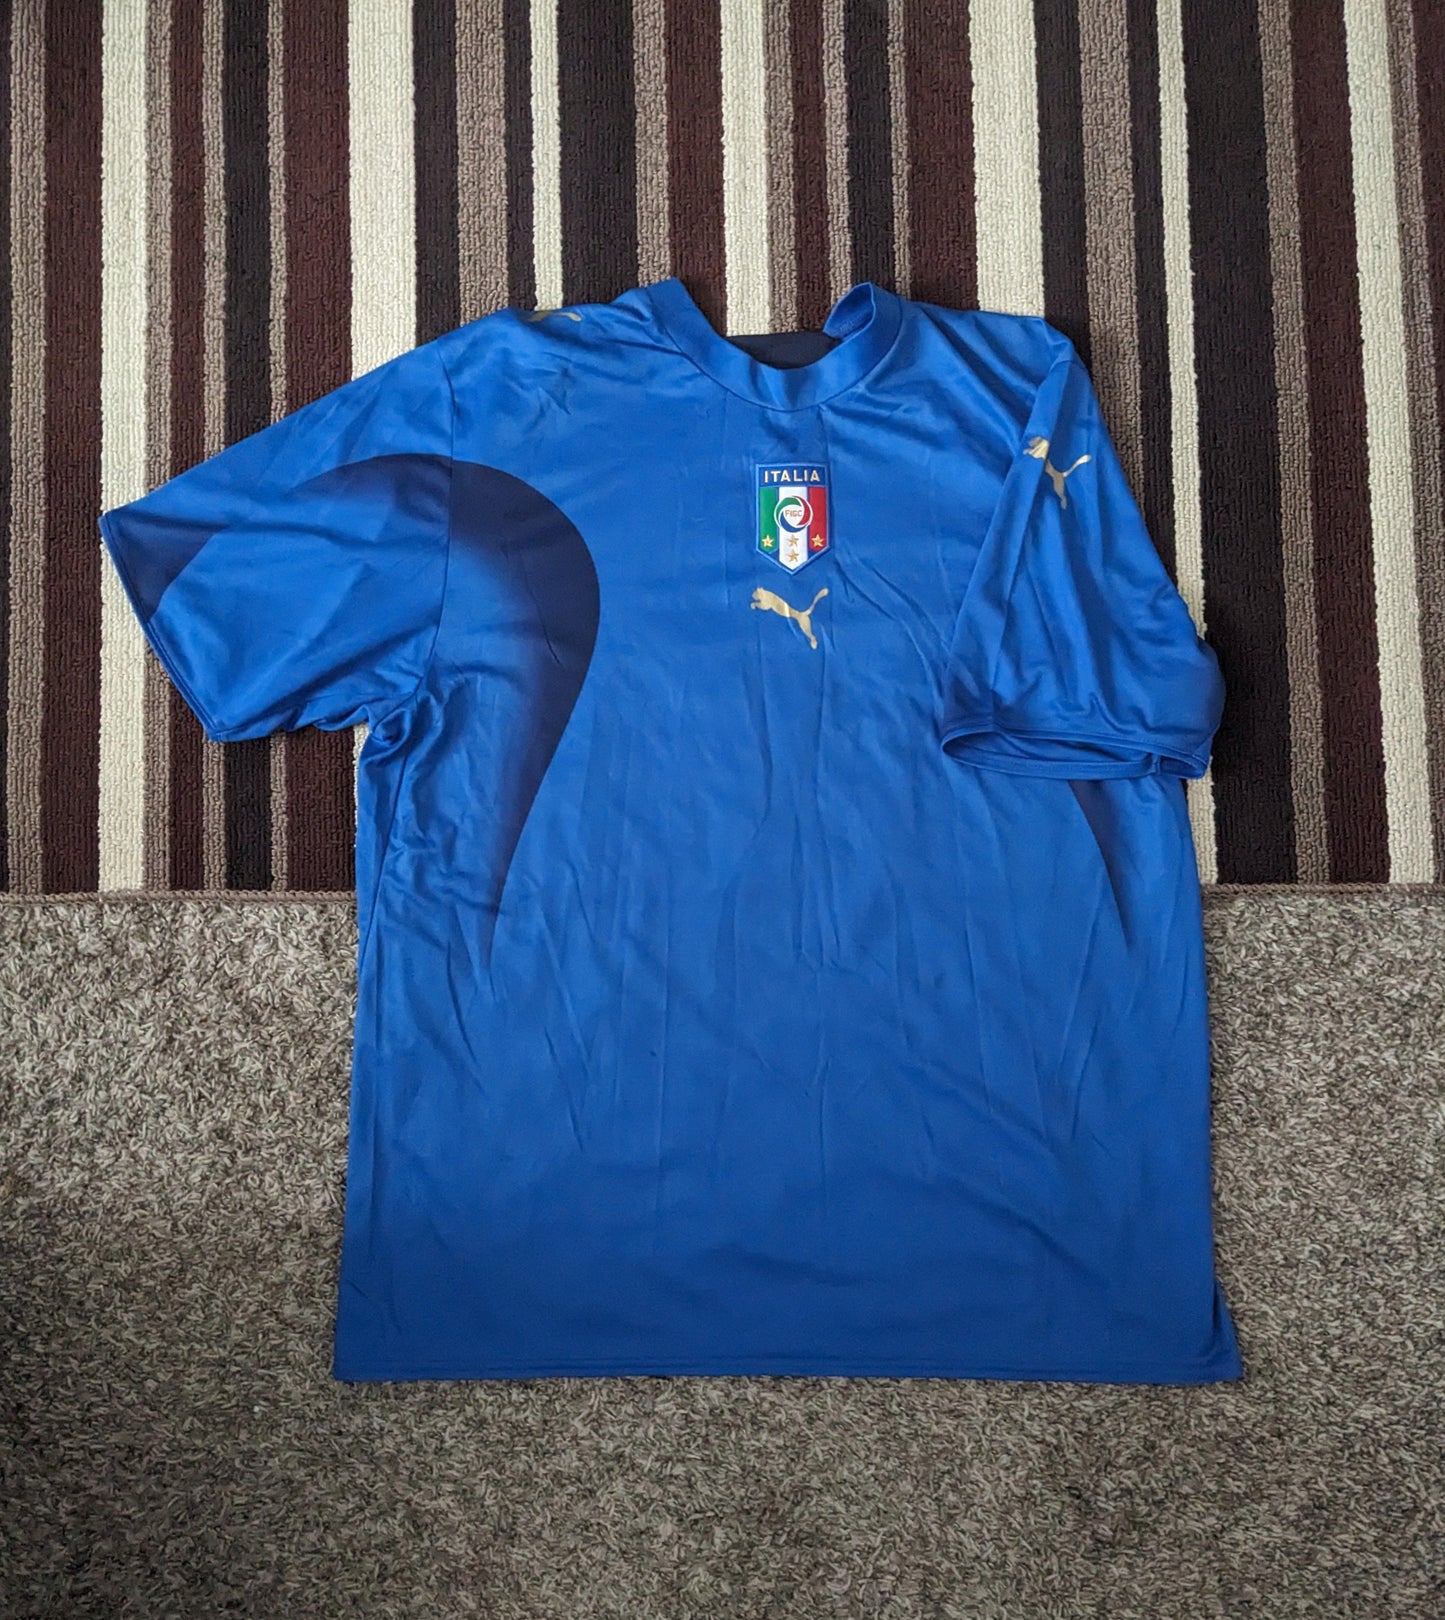 ITALY 2006 2007 NATIONAL TEAM HOME FOOTBALL SHIRT JERSEY #10 TOTTI AUTHENTIC (XL)